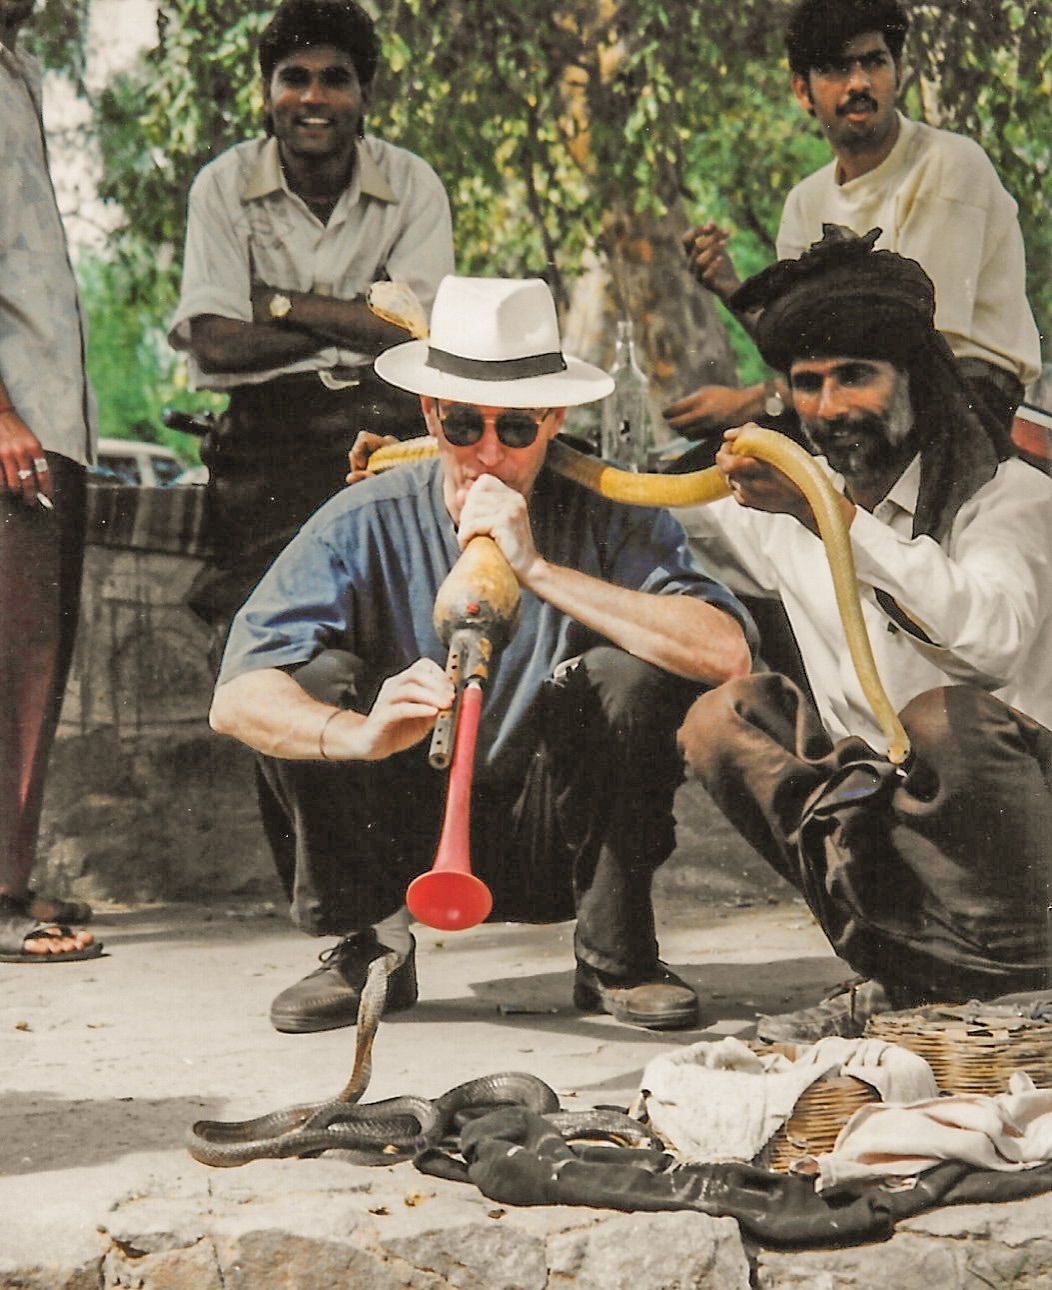 Rich copes with cobras in India / Expats Returning to a Changed America / Karen McCann / EnjoyLivingAbroad.com